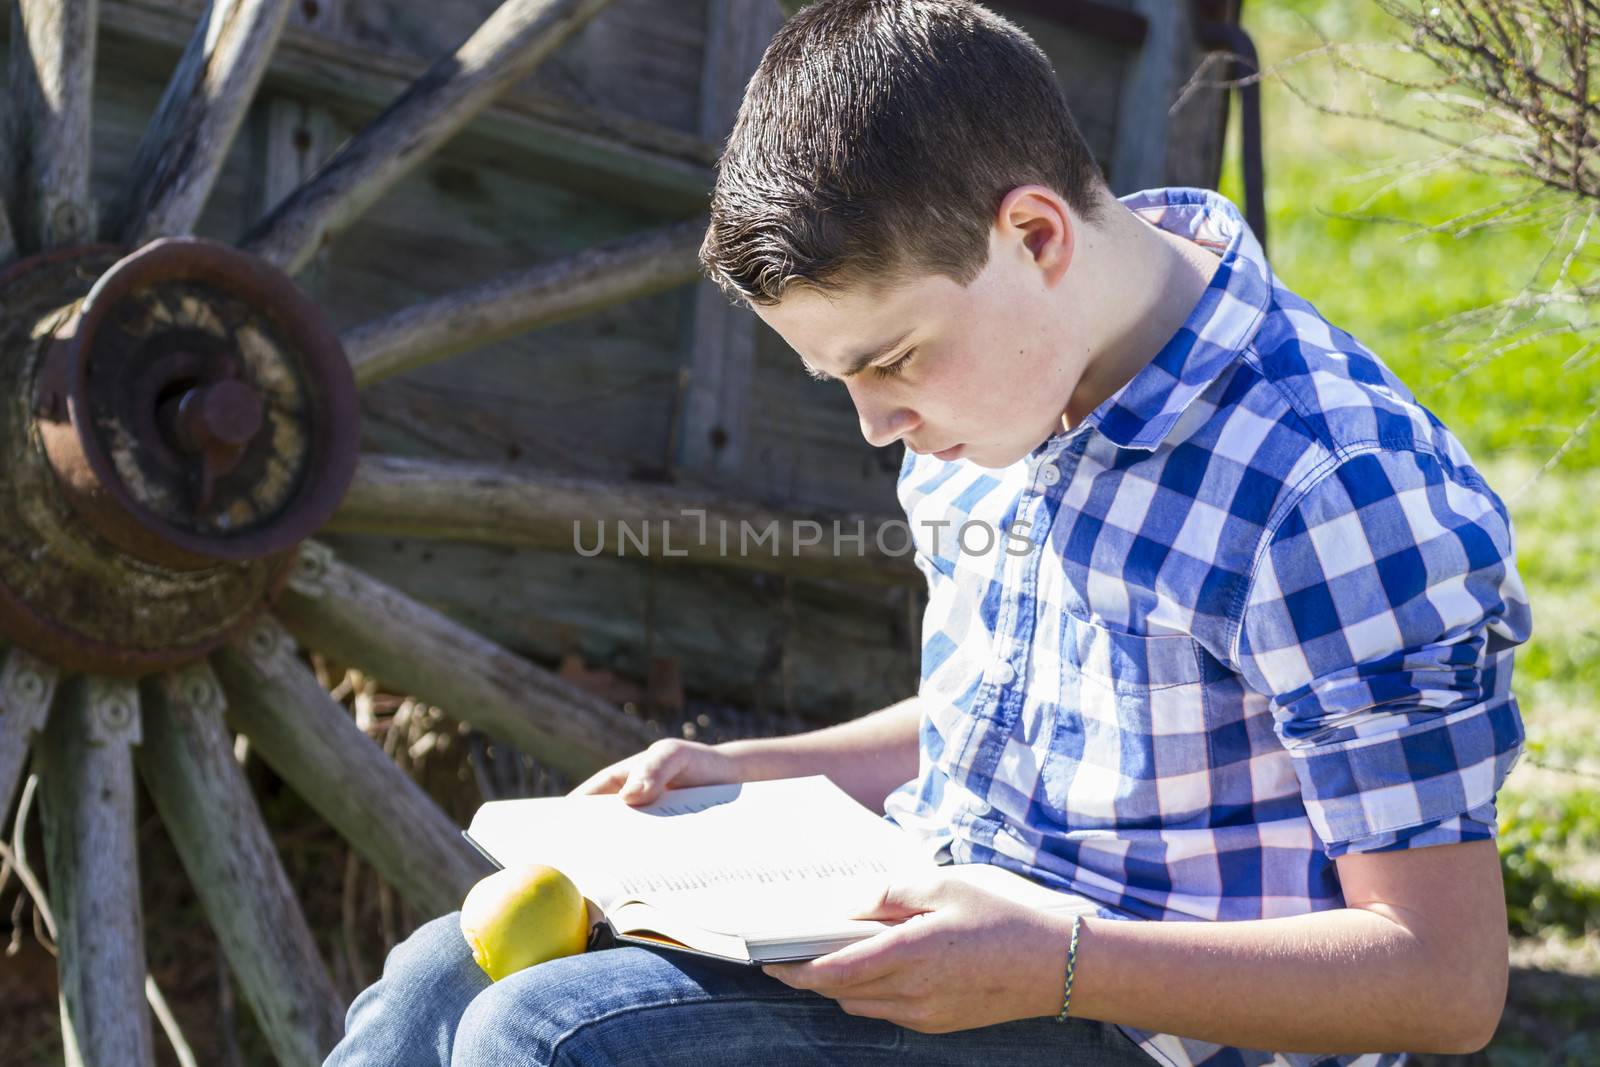 Rural.Young man reading a book in outdoor with yellow apple. Rural scene